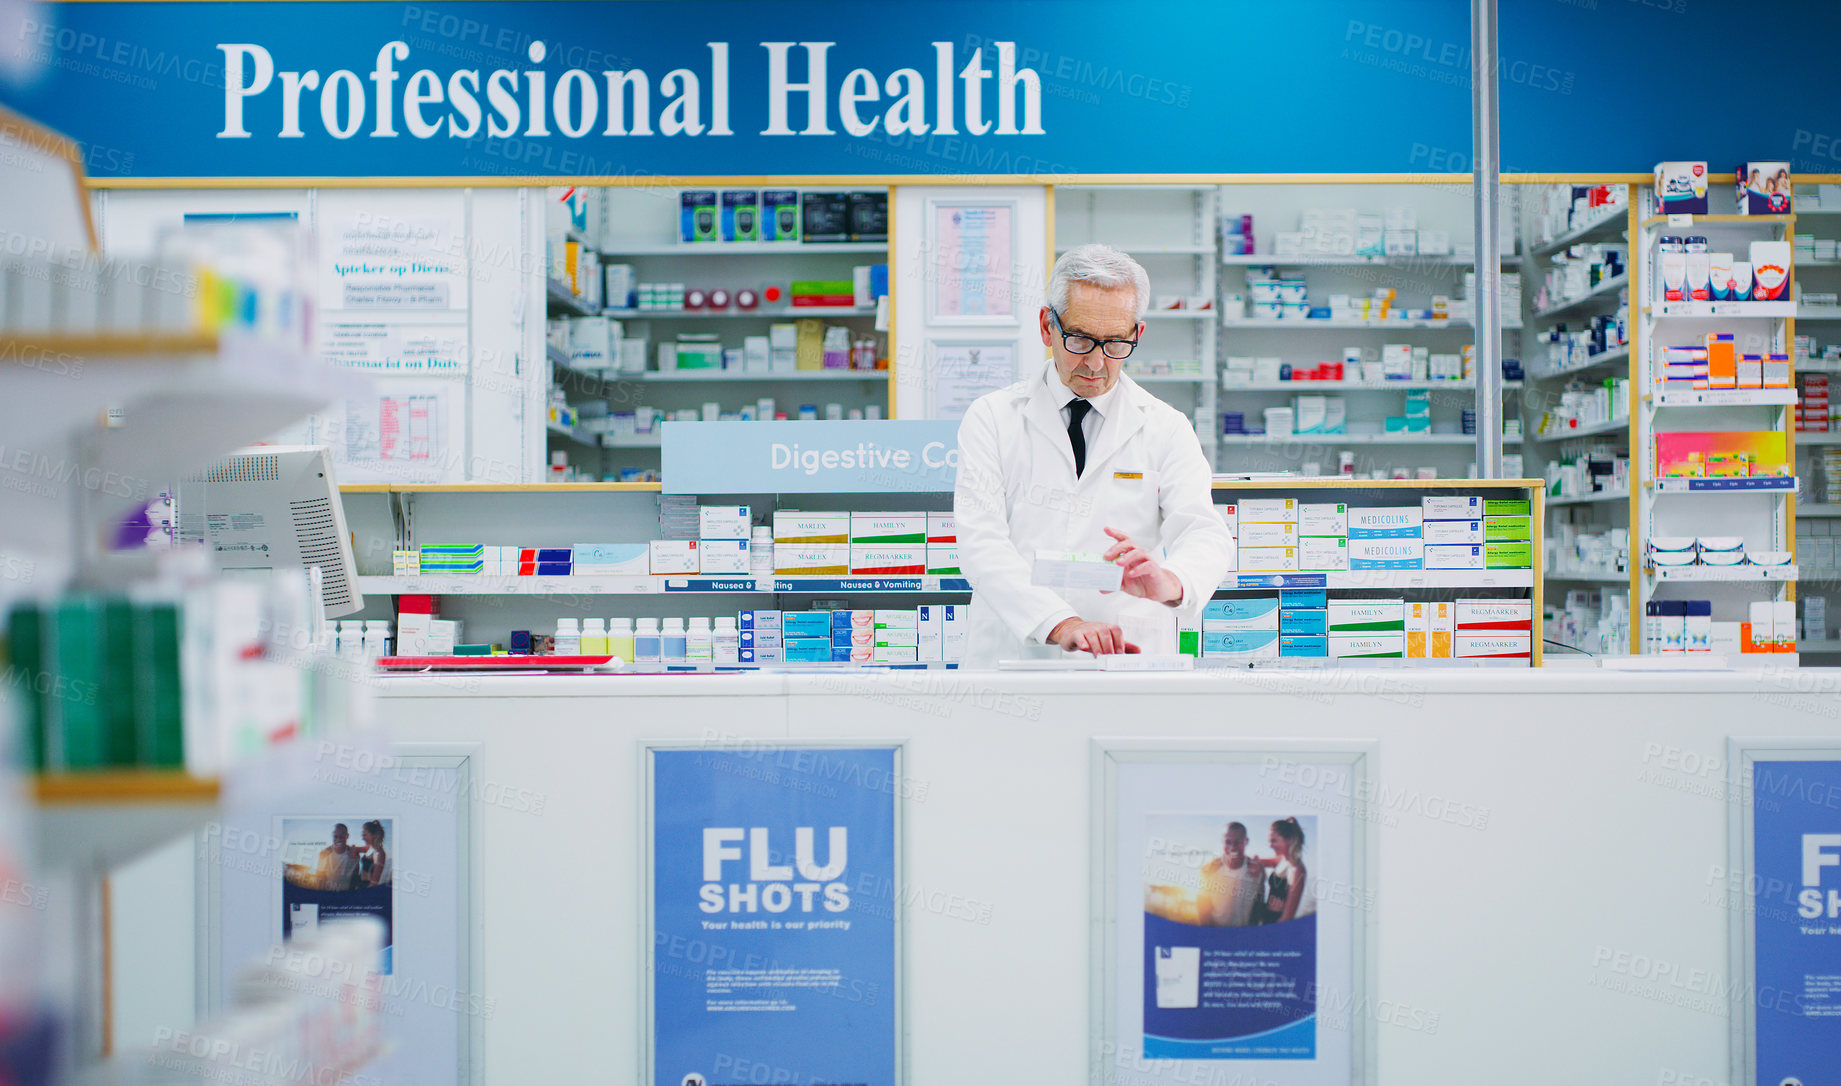 Buy stock photo Pharmacy package, elderly man and chemist reading pharmaceutical, supplements or product info. Typing, store medicine and male pharmacist research supplement prescription information for healthcare